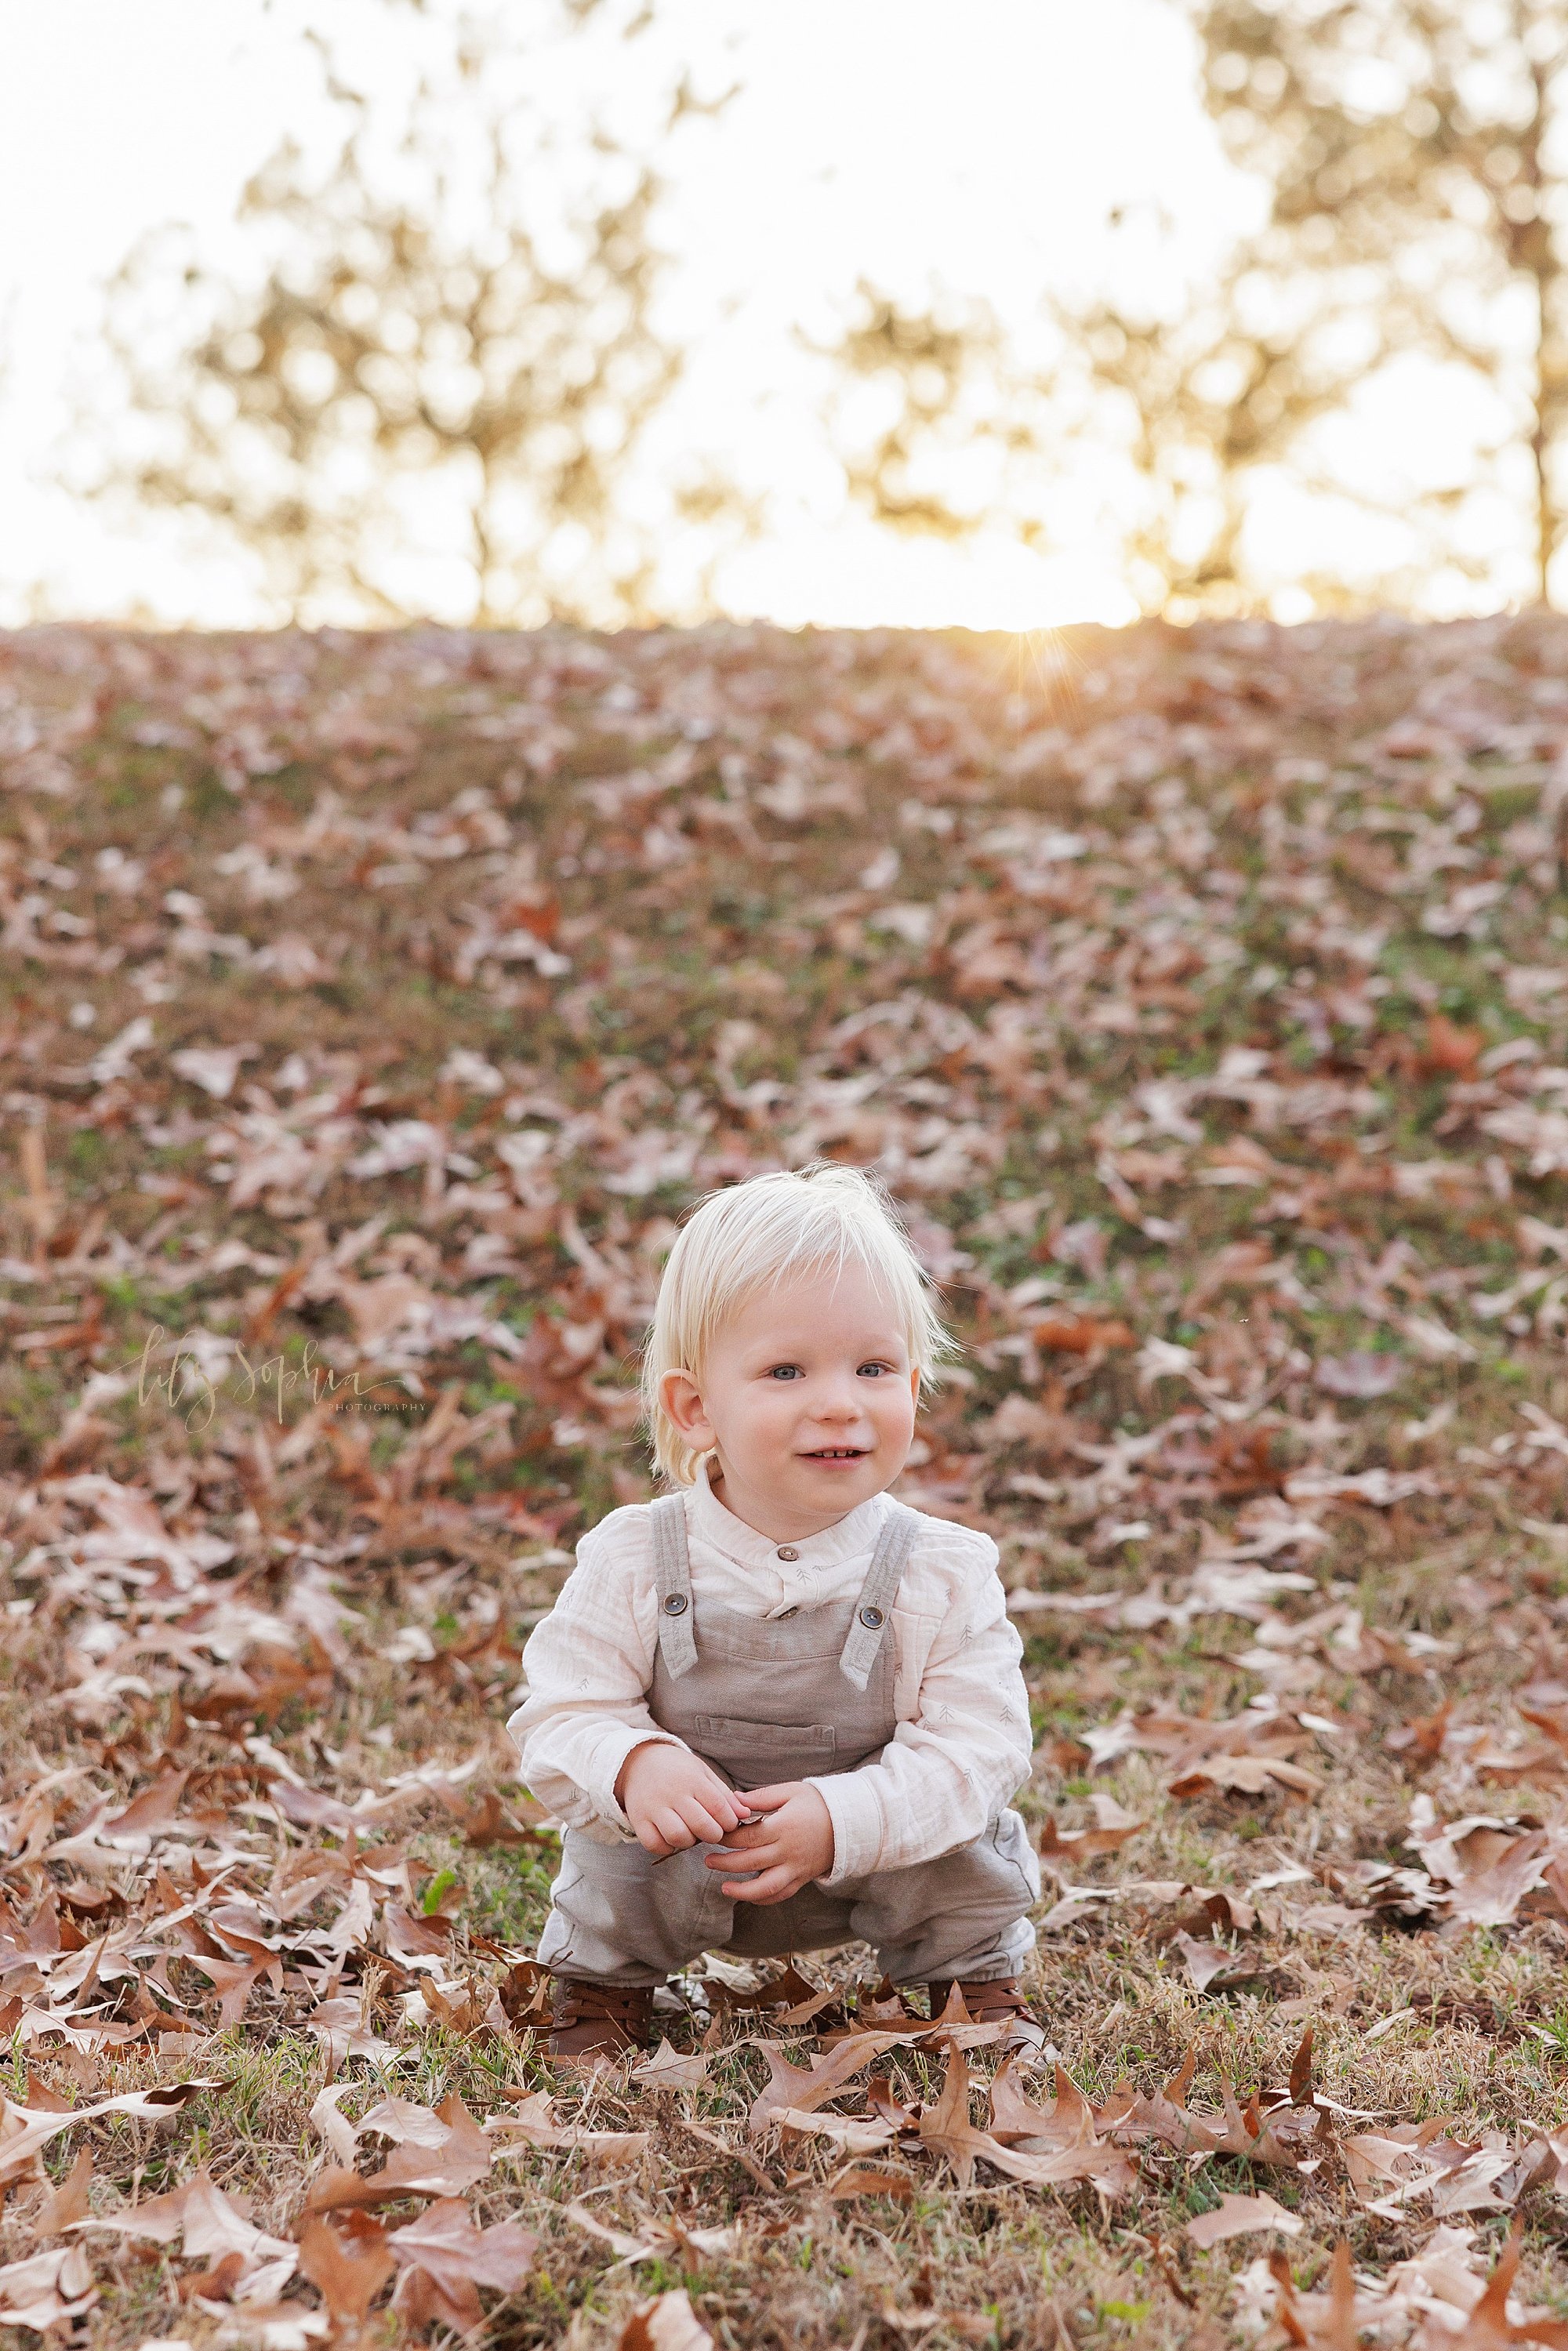  Family picture of a toddler boy as he squats to pick up a leaf in an Atlanta park during autumn at sunset. 